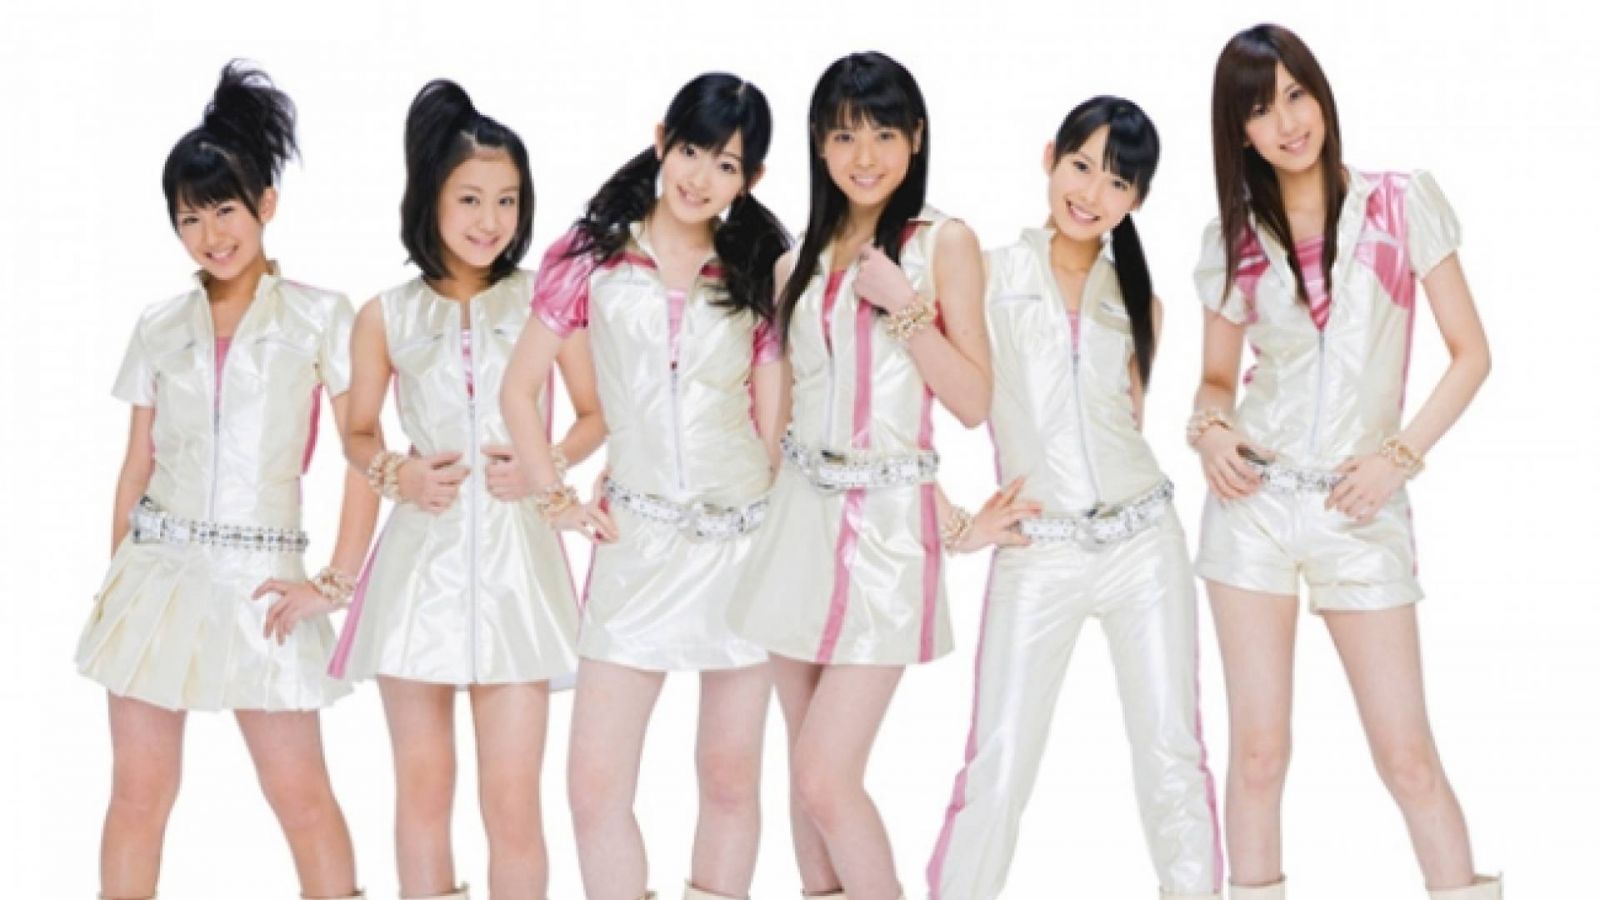 ºC-ute New Release © JapanFiles.com / Up Front Agency